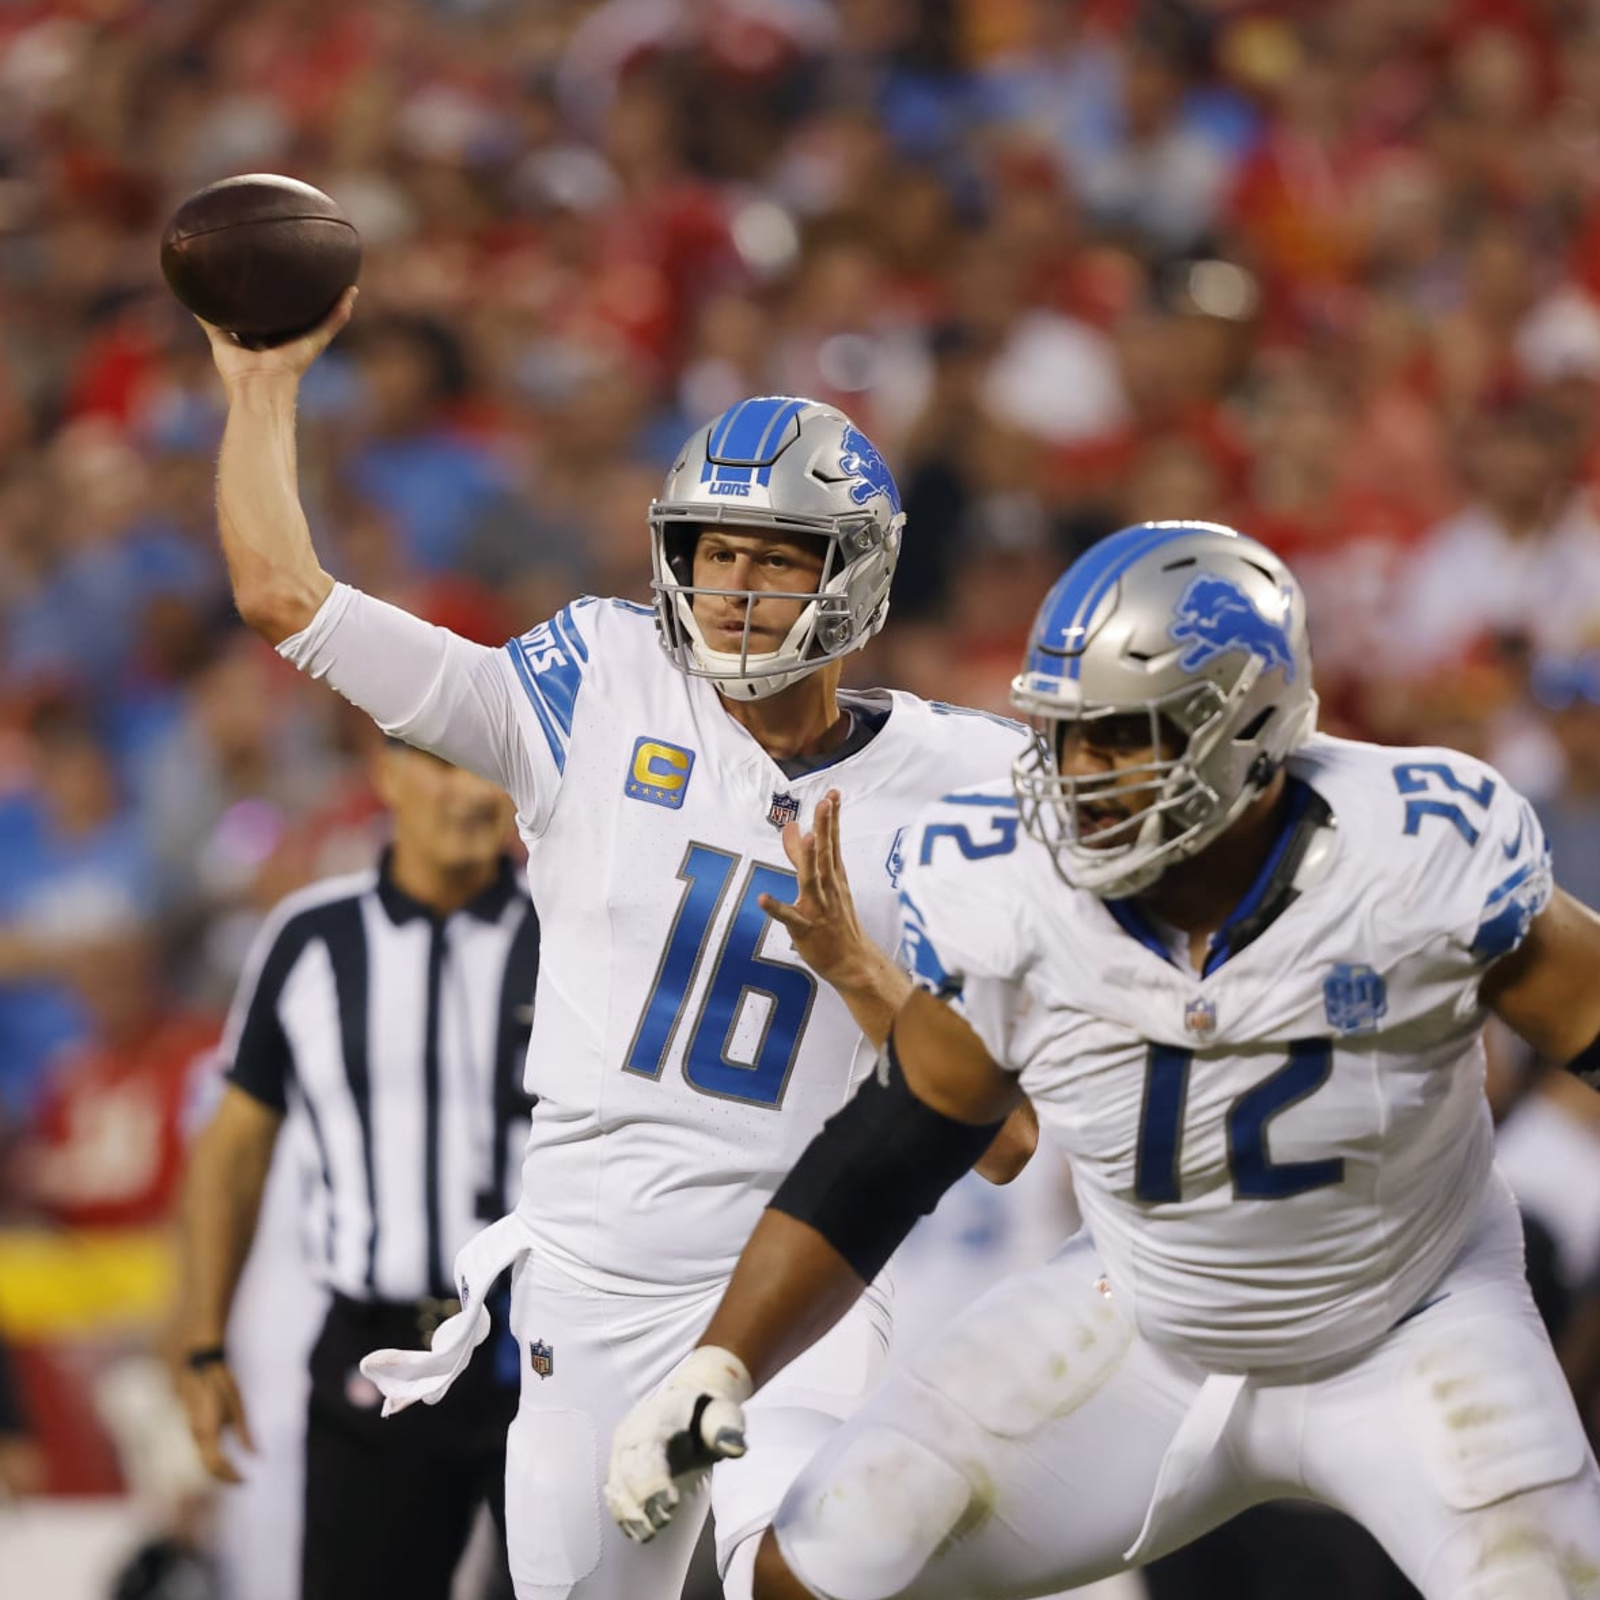 Lions - Chiefs: Final score and highlights from Week 1 opener